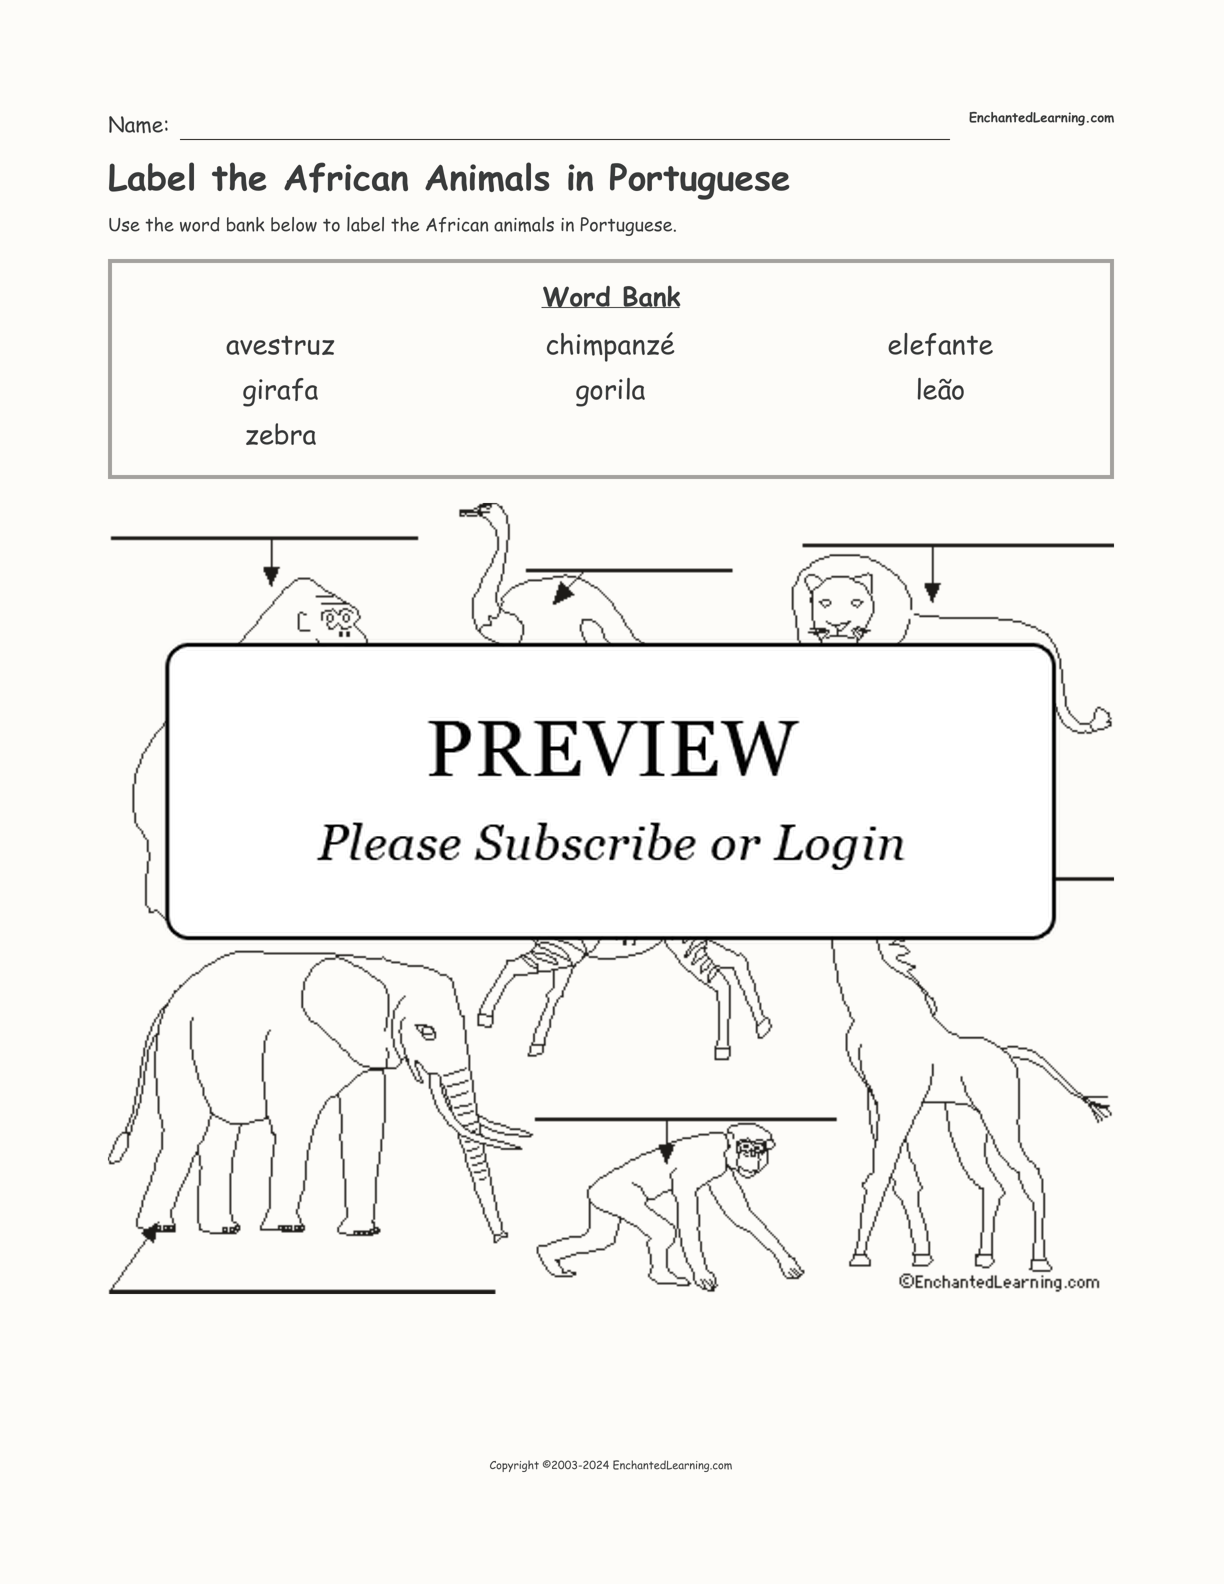 Label the African Animals in Portuguese interactive worksheet page 1